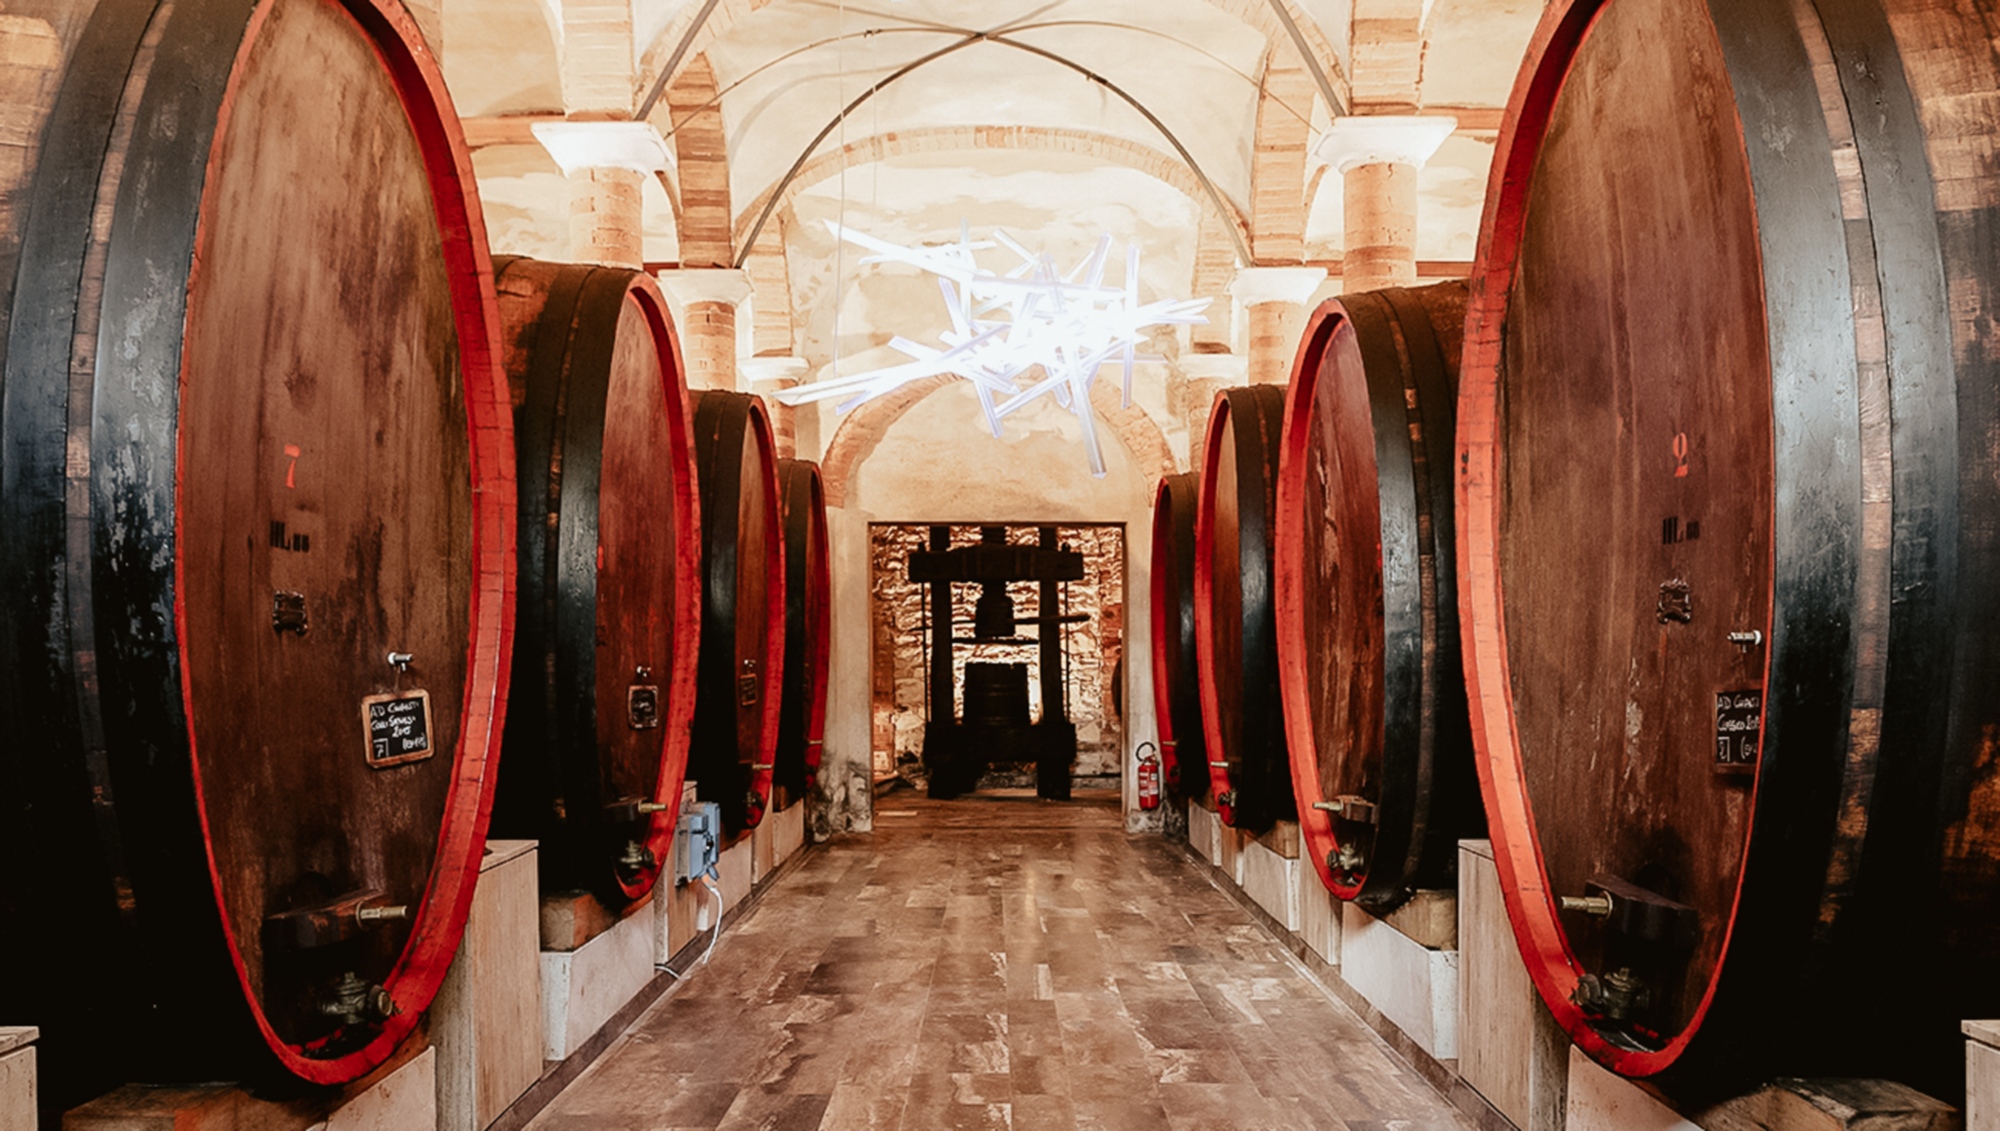 Tasting experience in a brewery located in Castelnuovo Berardenga, borders of the Crete Senesi and the southern hills of Chianti.